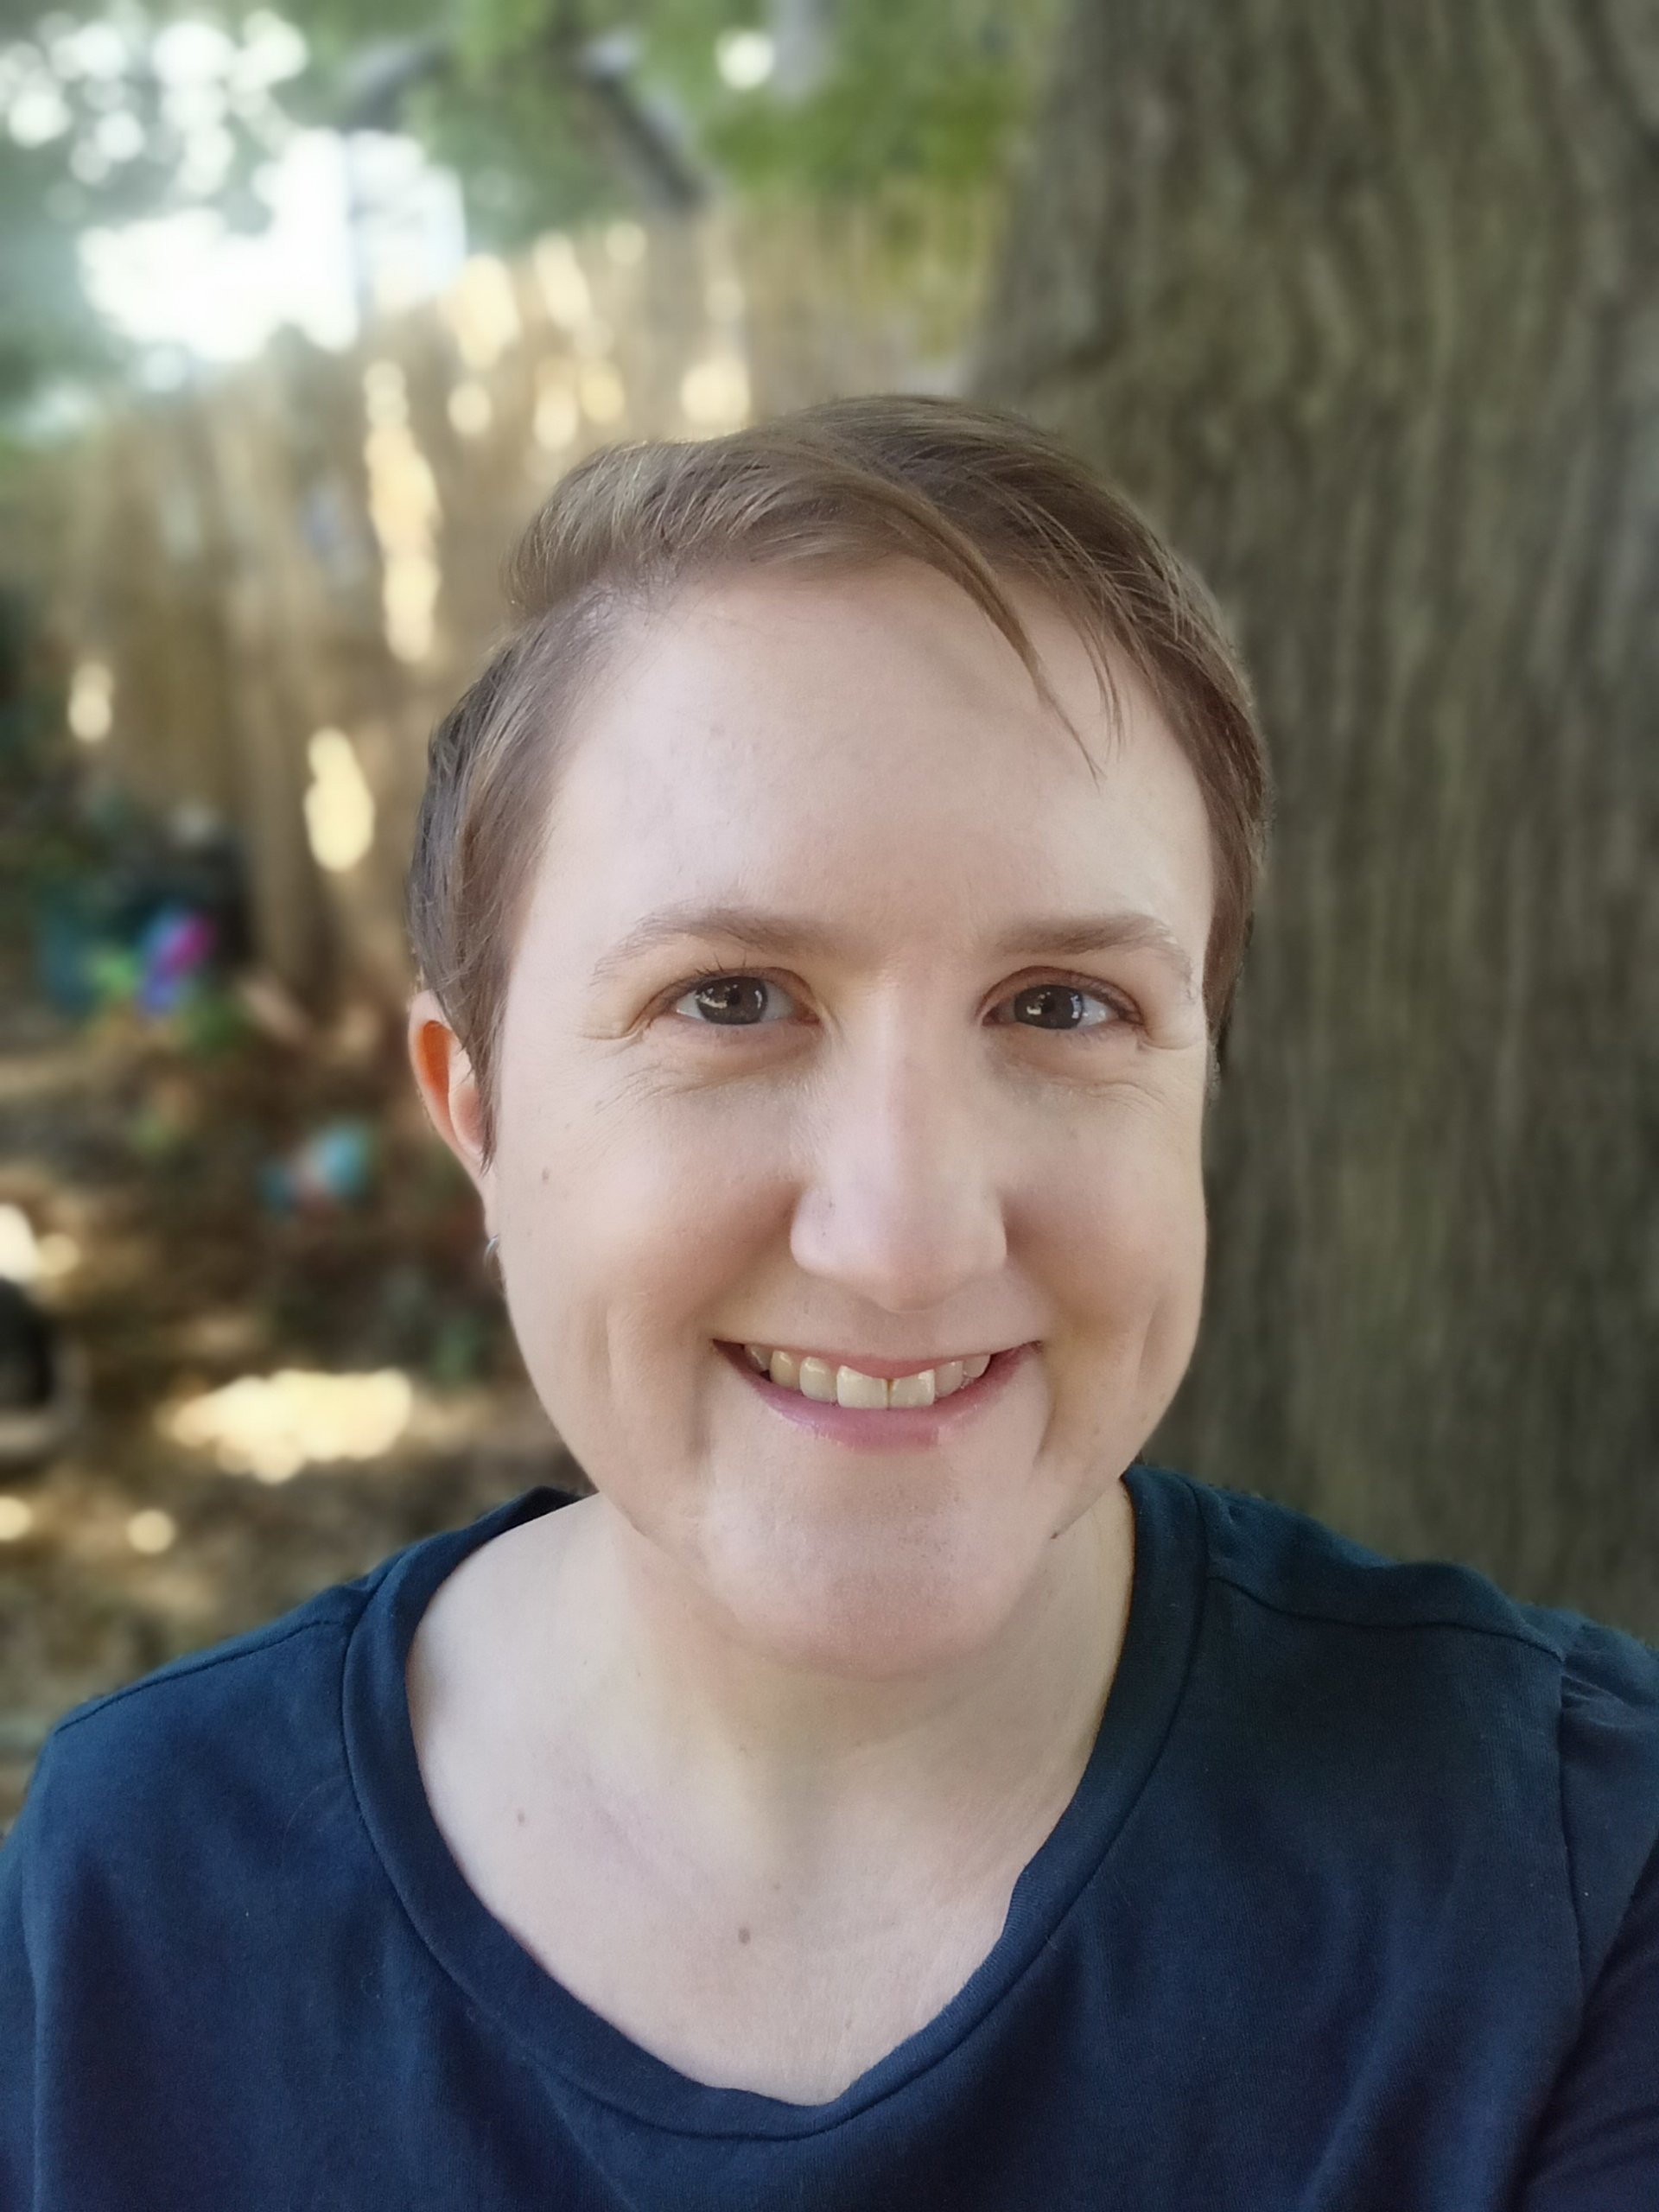 A close headshot of Alison, a woman with short hair and in a dark blue t-shirt.